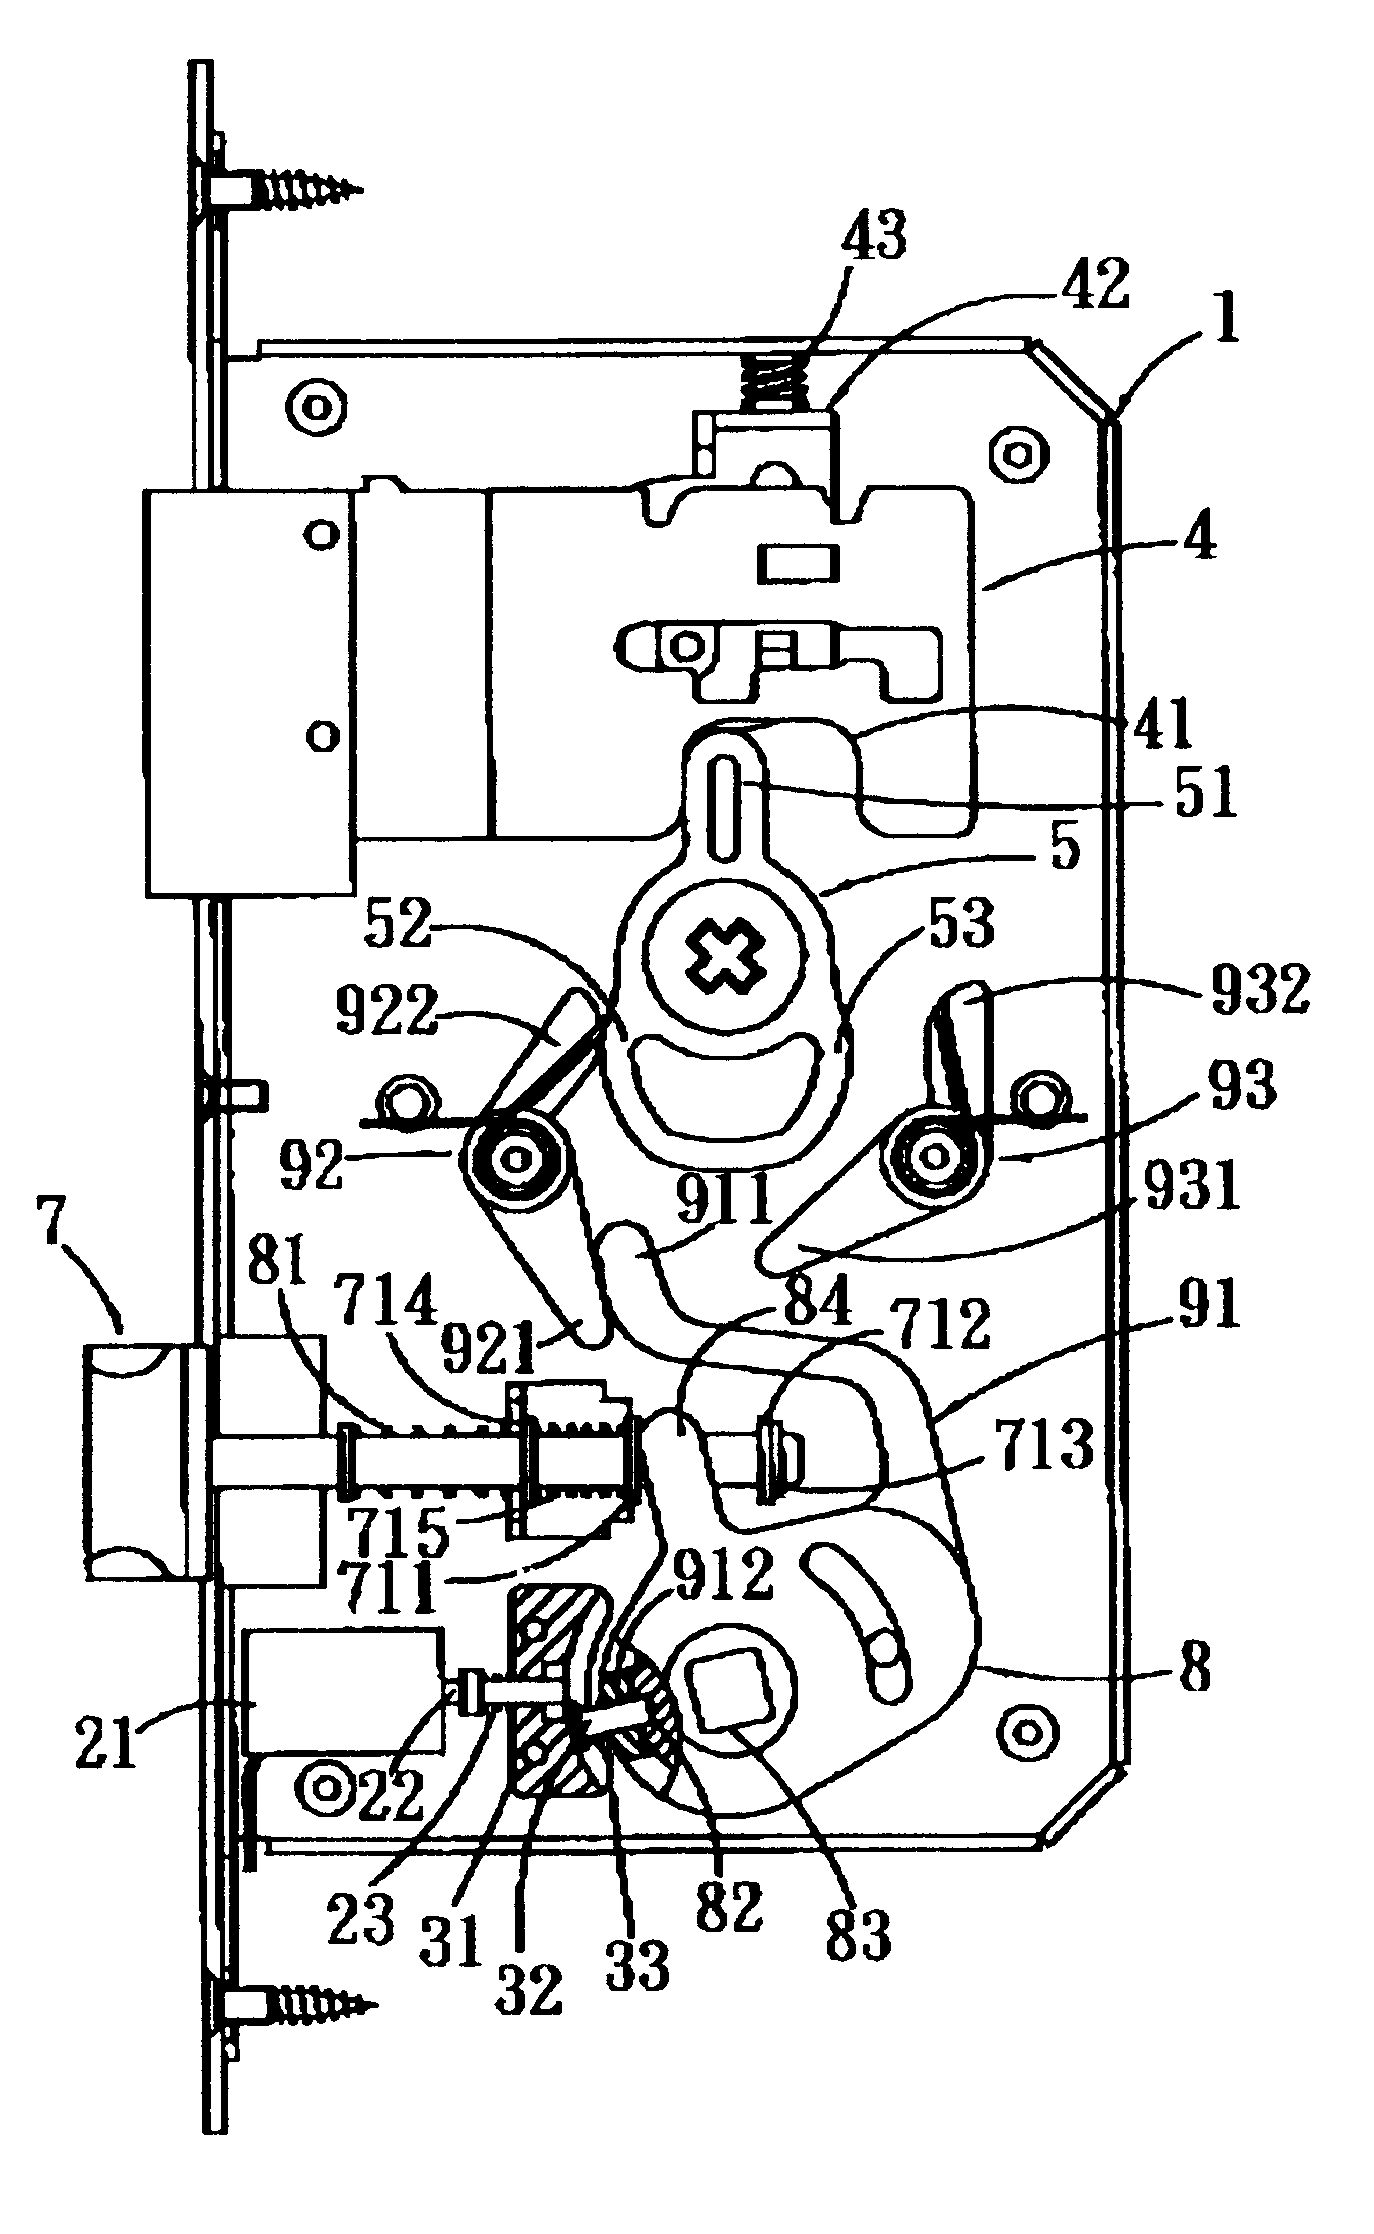 Lock construction having an electrically activated clutch mechanism and a transmission mechanism